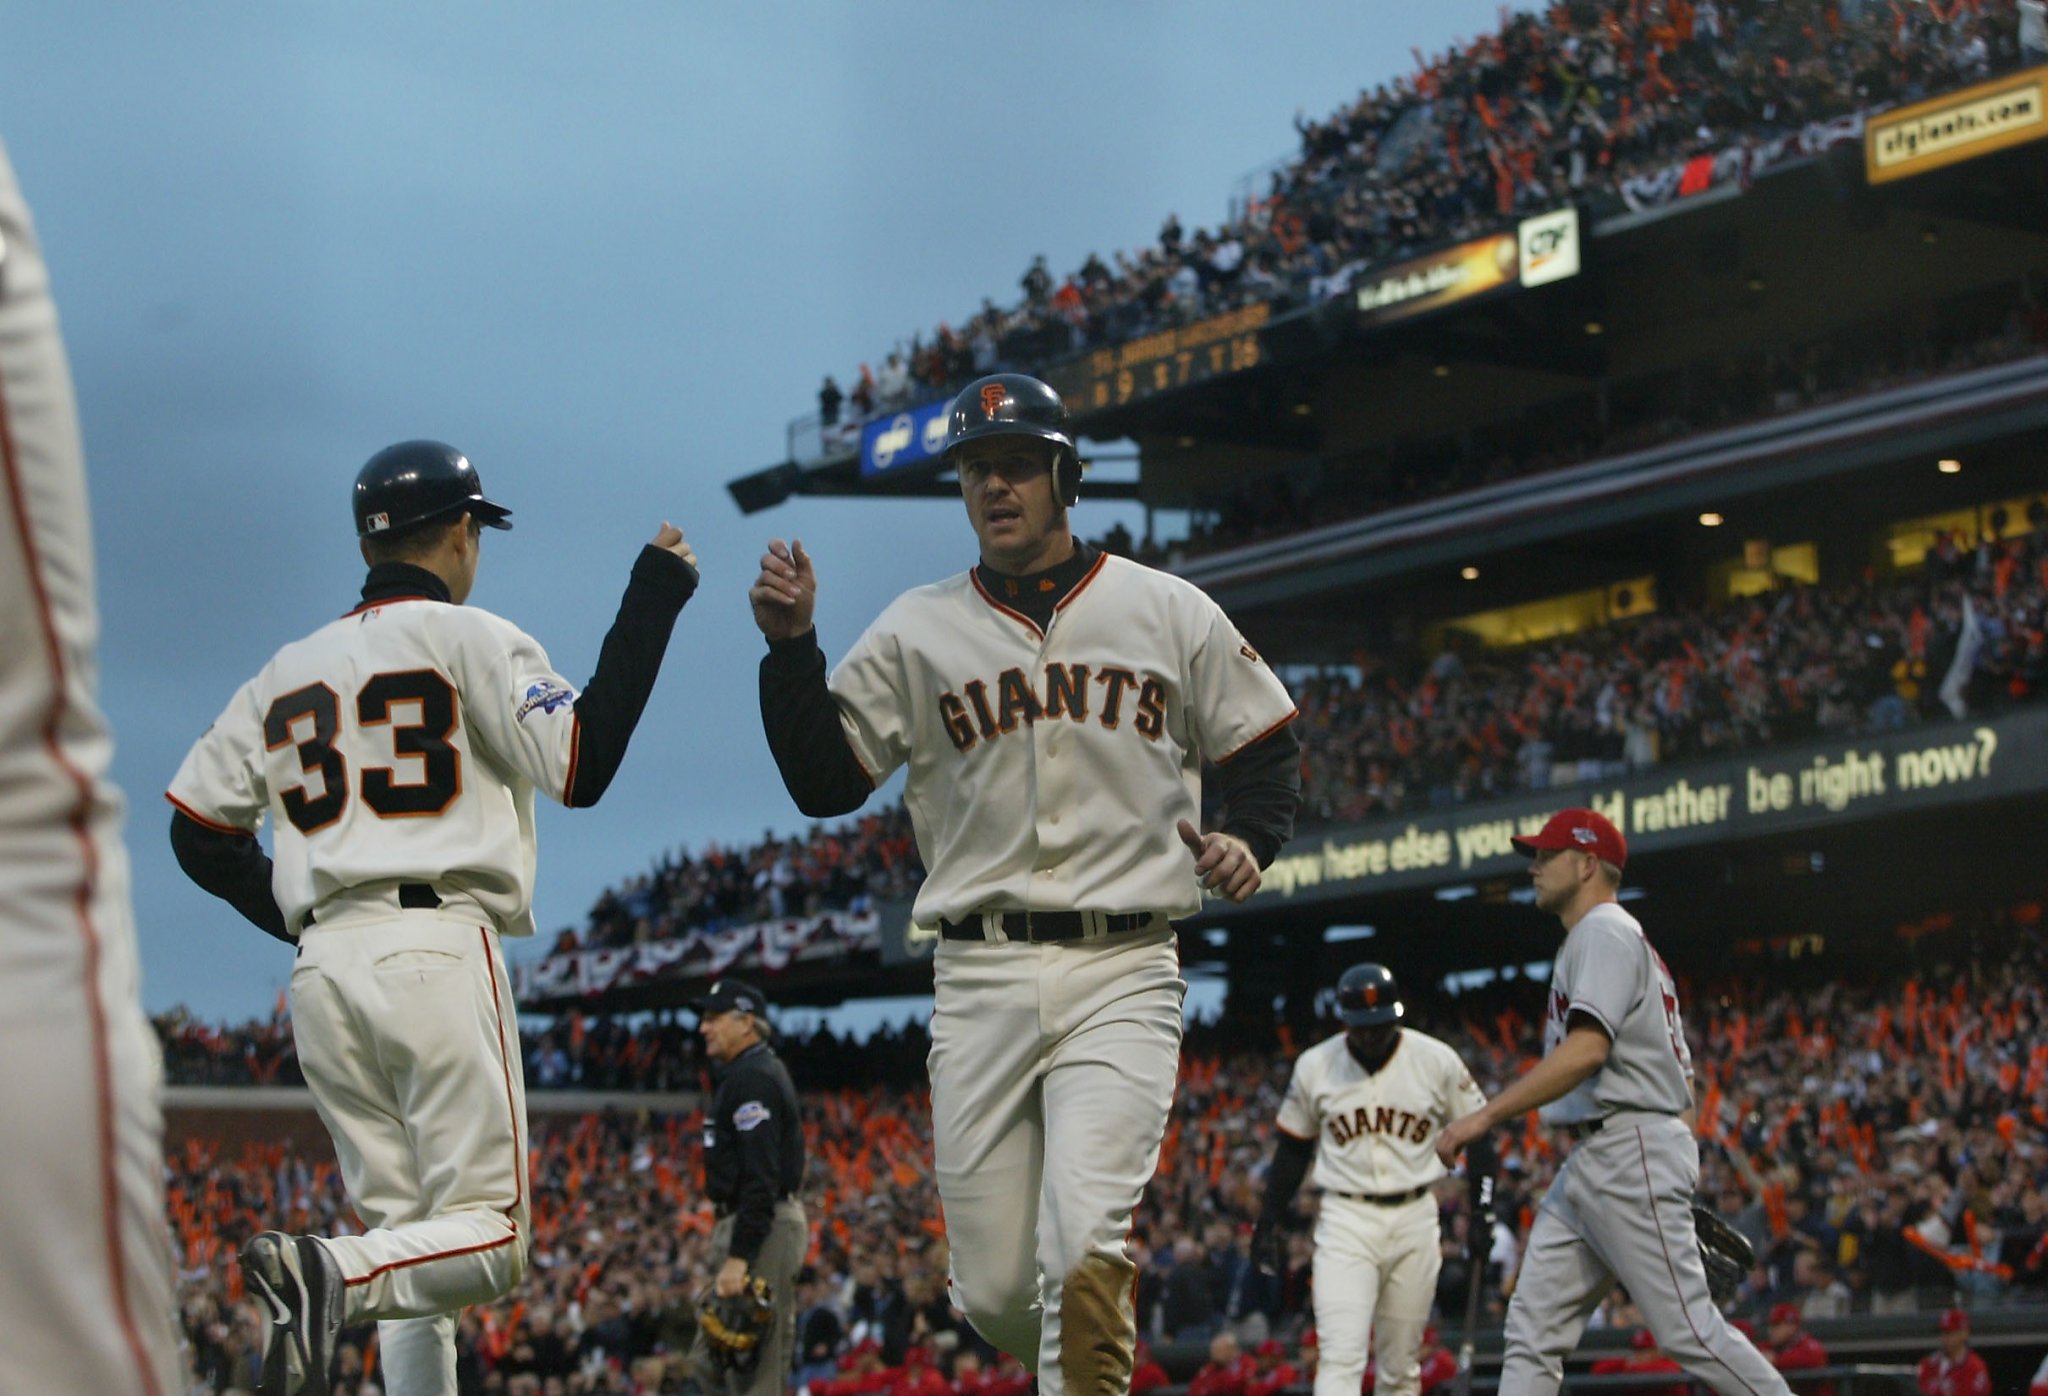 Jeff Kent's not making the Hall of Fame anytime soon - McCovey